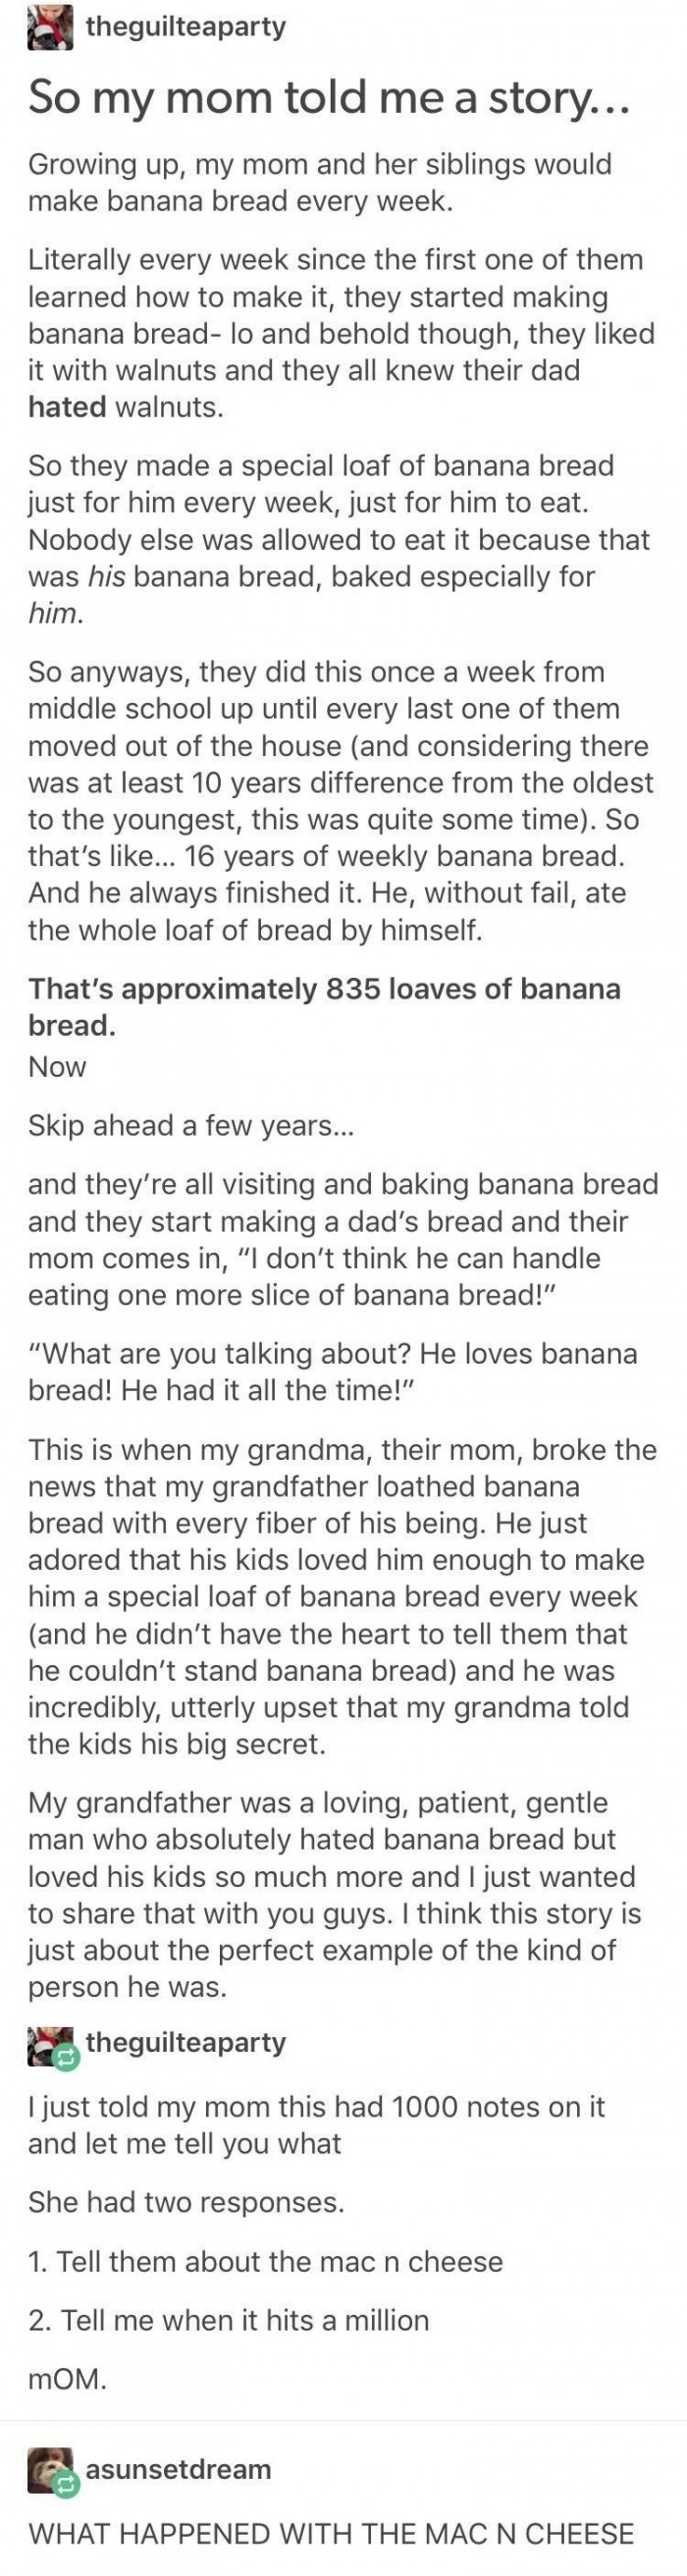 4. First, awwwww.... grandparents are great! And second, what happened with the mac n cheese?